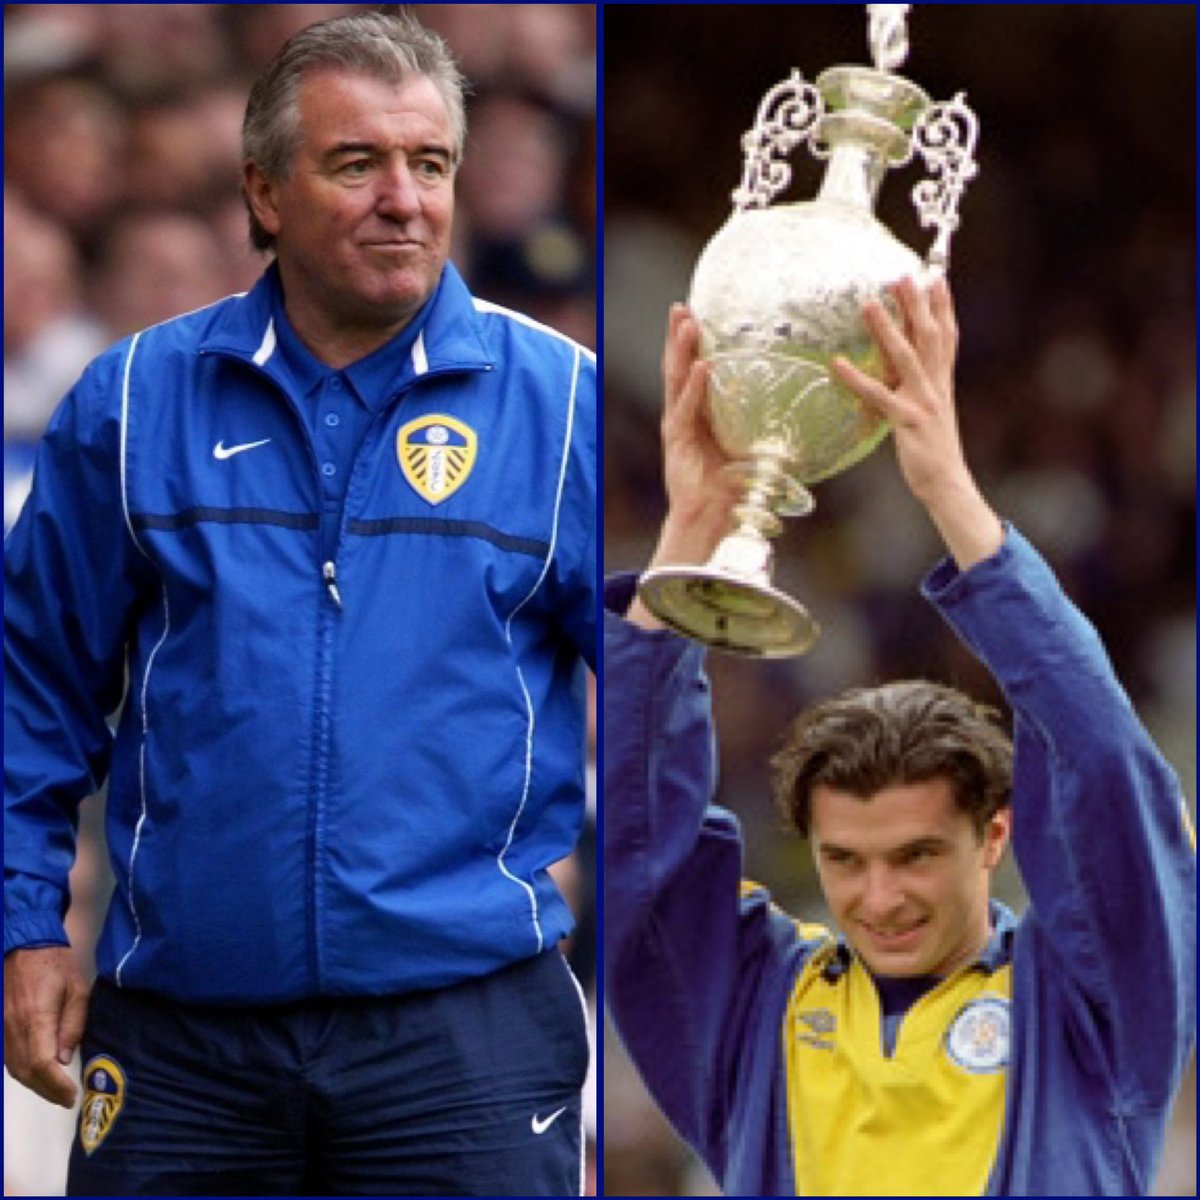 For information ahead of tomorrow’s game: ◦A minutes applause in memory of Terry Venables will happen ahead of Kick off, ◦1️⃣1️⃣th minute on screen tribute for Gary Speed